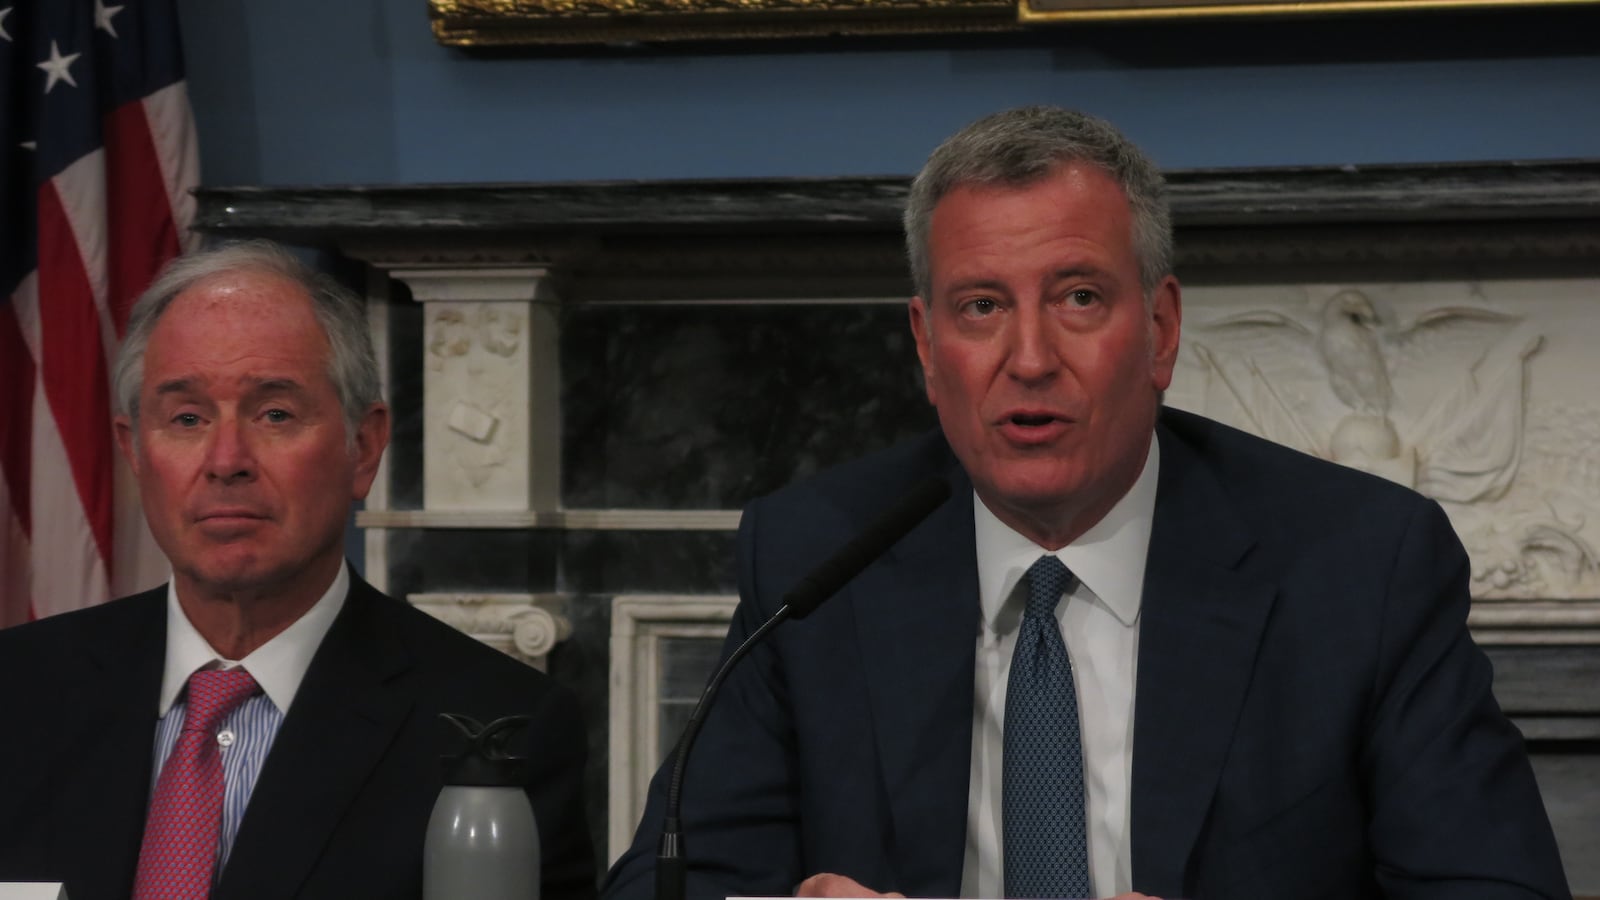 Mayor Bill de Blasio holds a press conference to call for an extension of mayoral control.